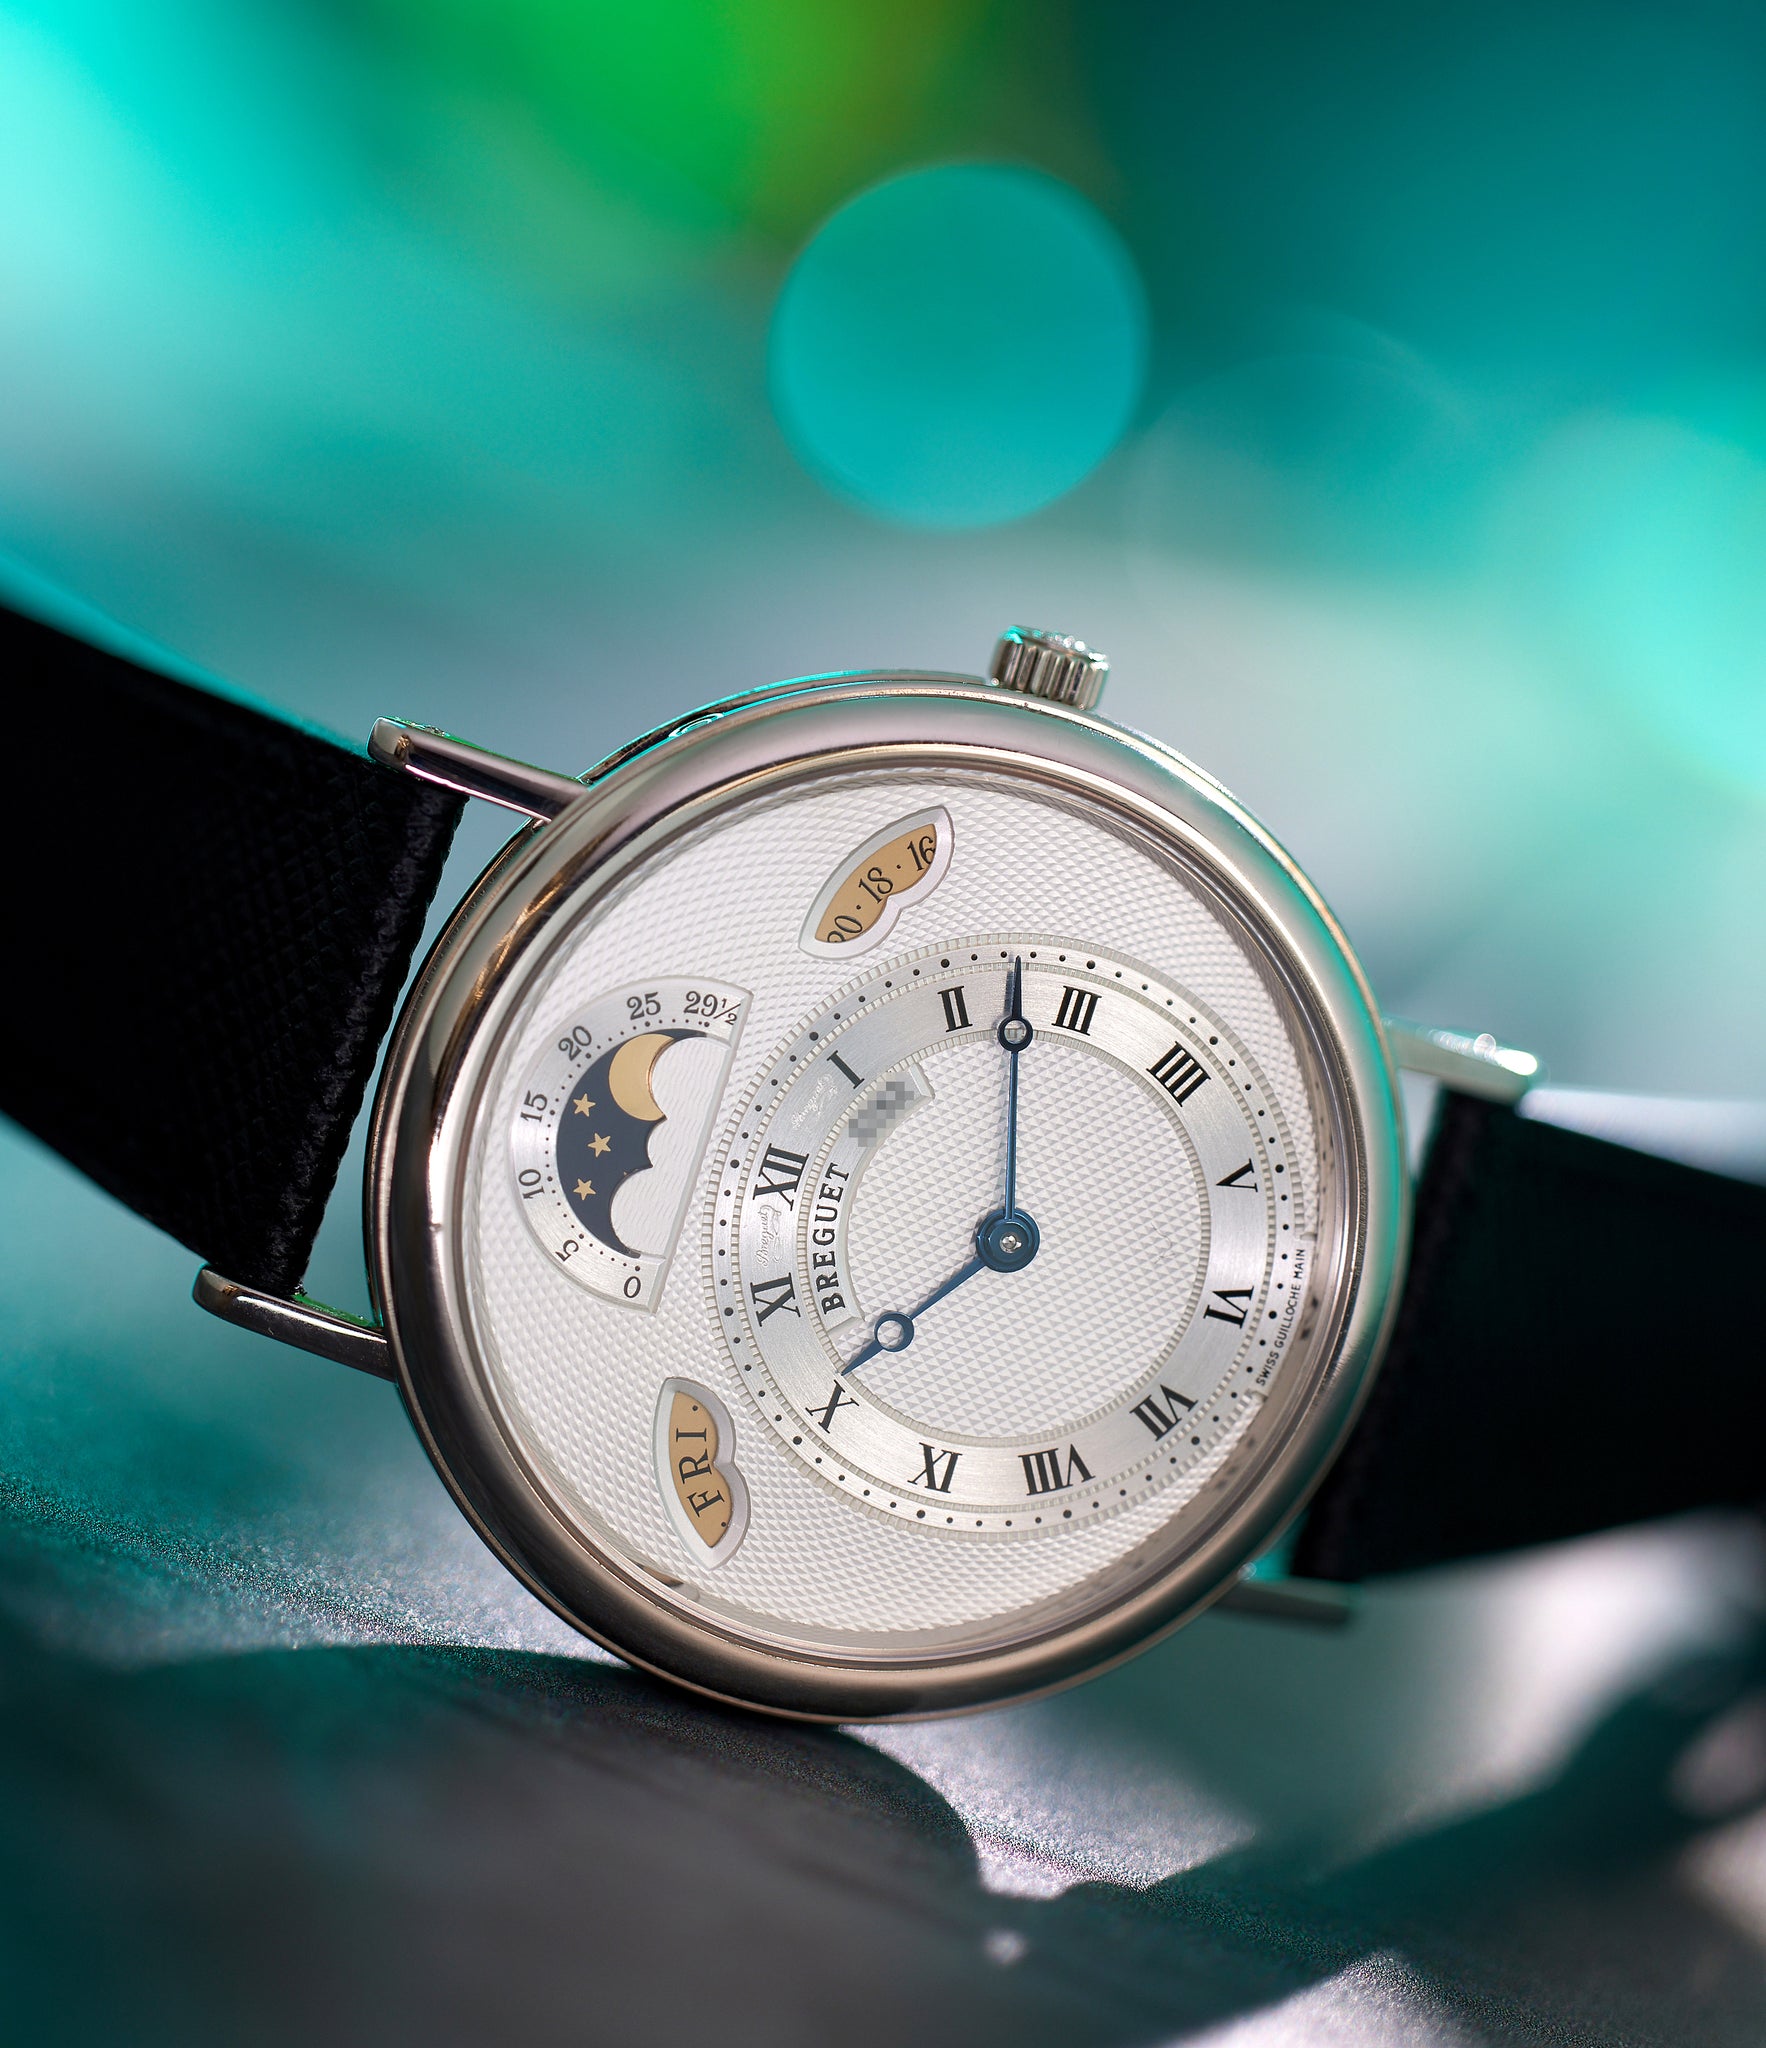 Breguet Classic Day-Date Moonphase | Ref. 3330 | White Gold | A Collected Man London